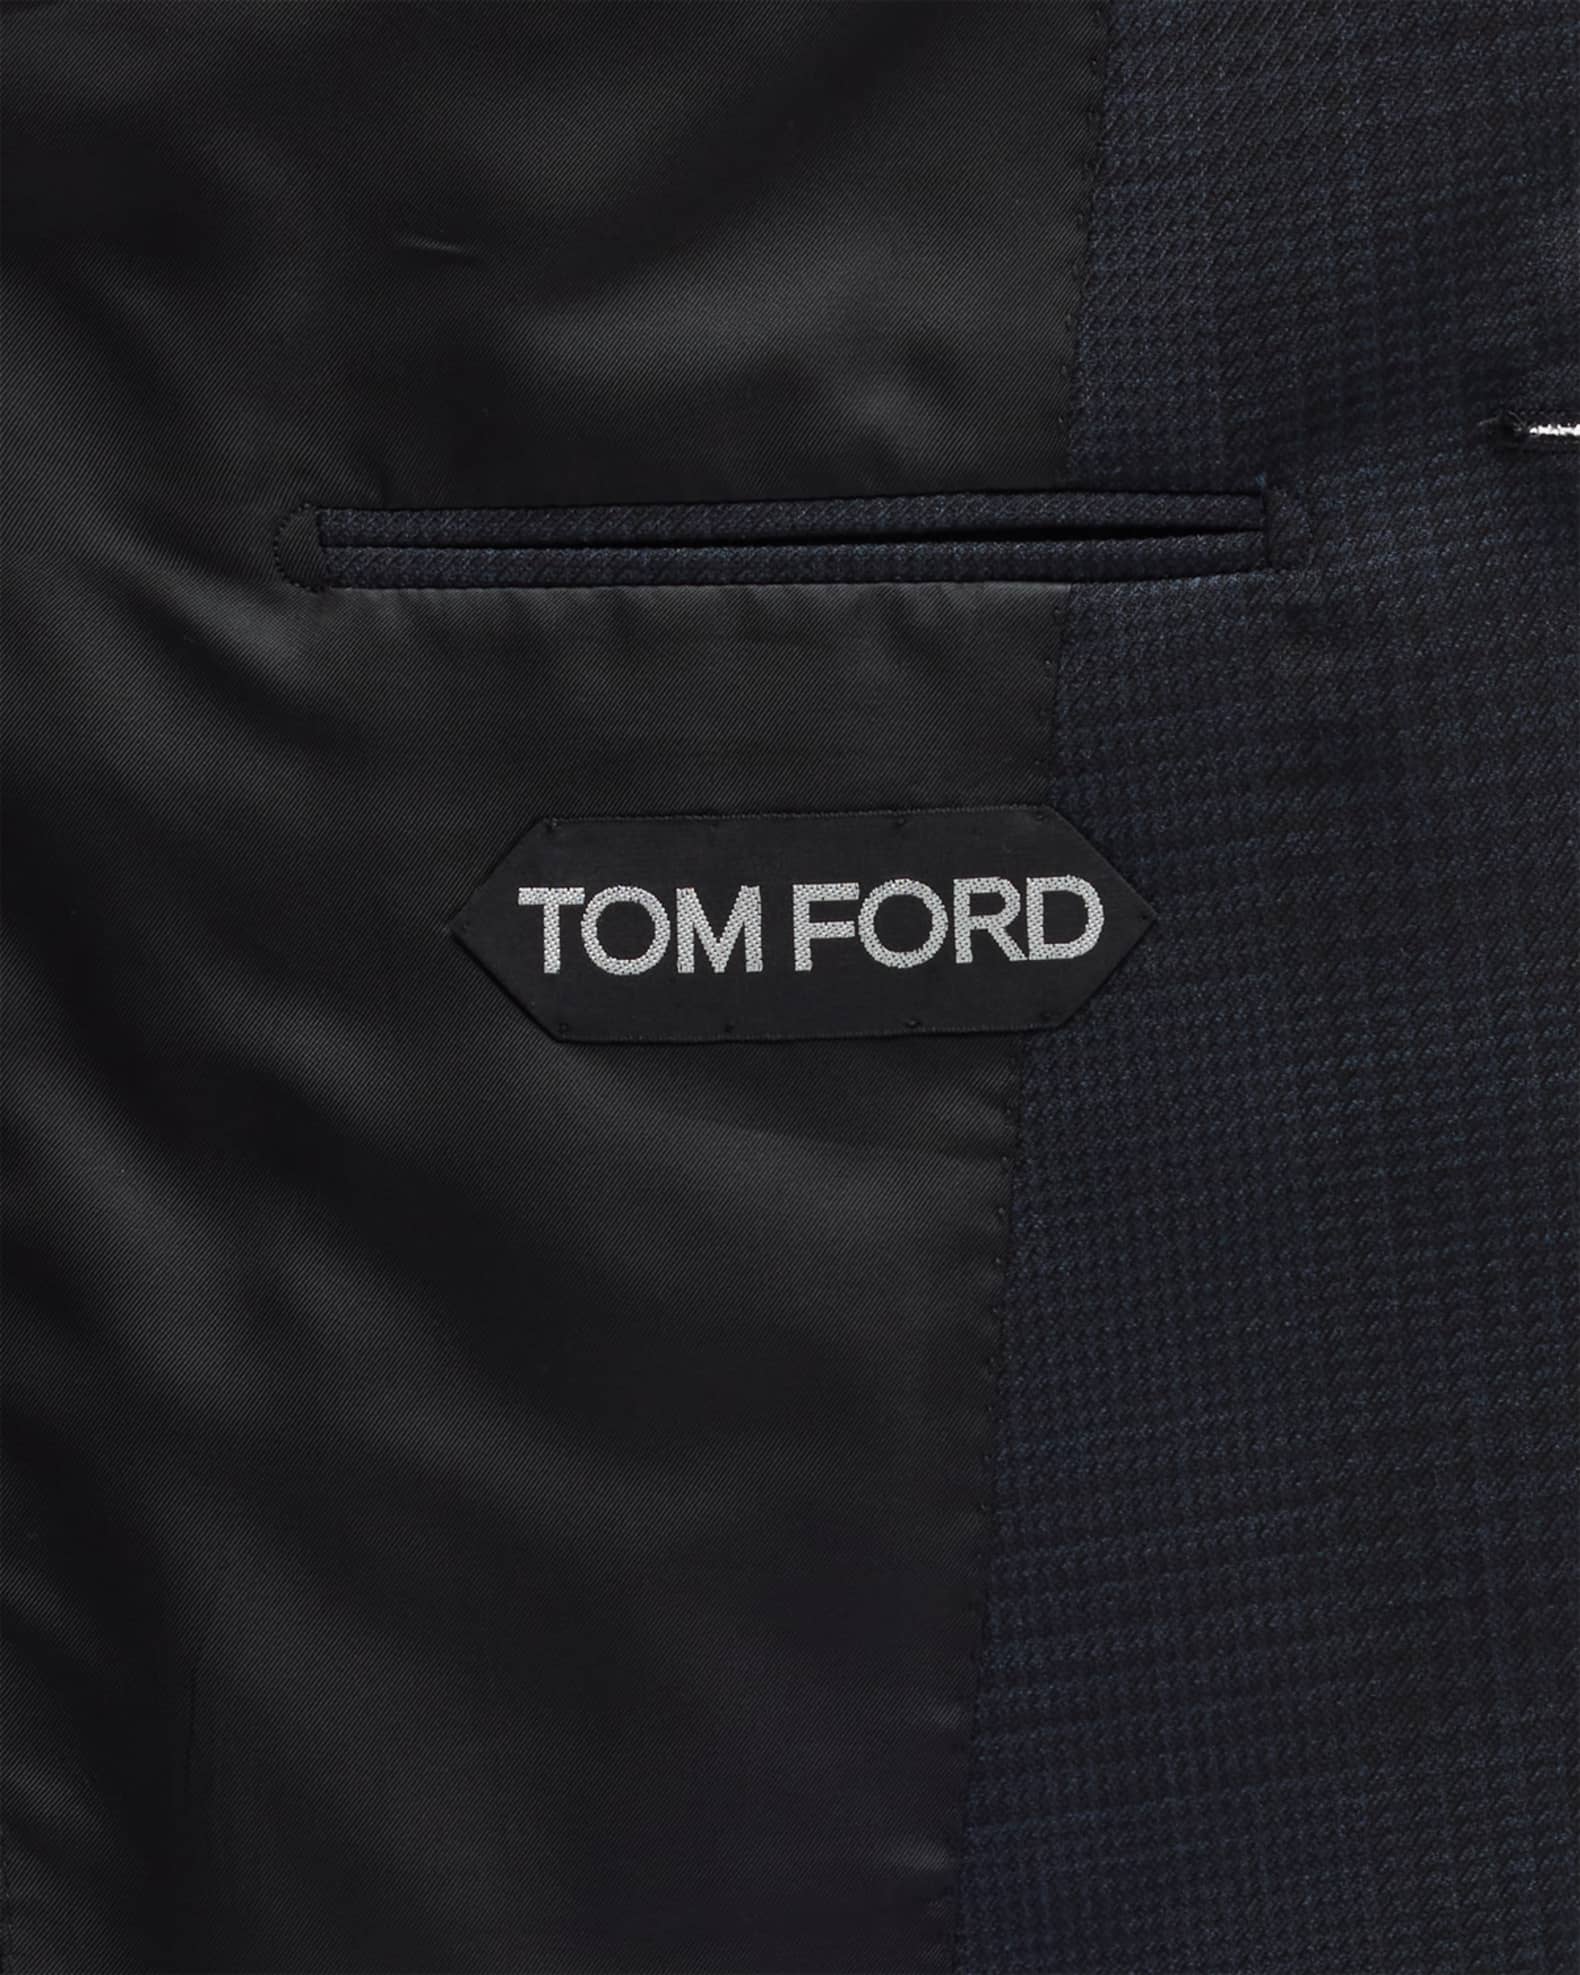 TOM FORD Men's Shelton Prince of Wales Sport Jacket | Neiman Marcus